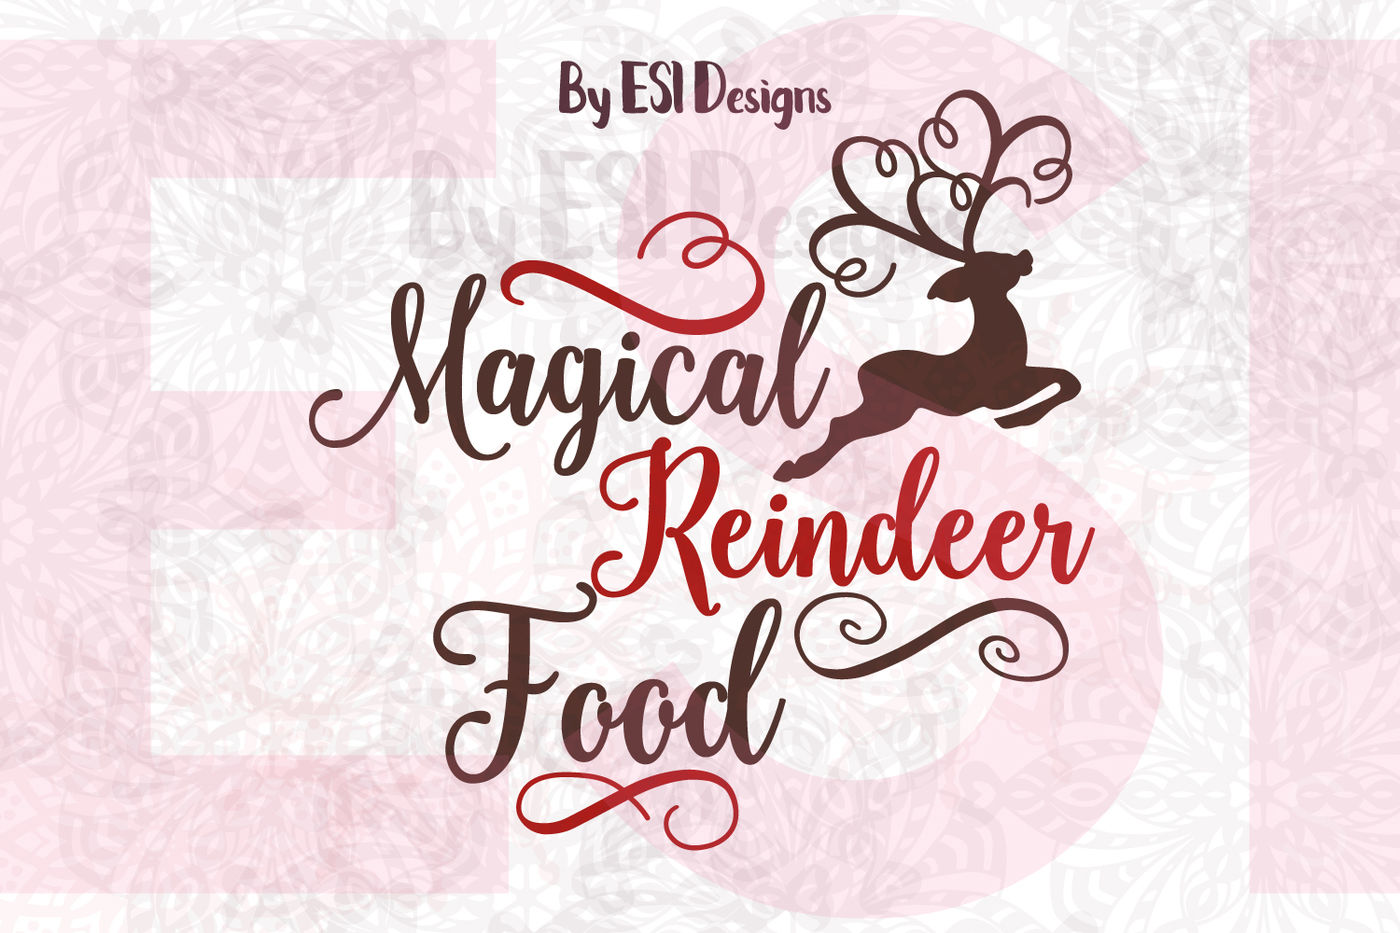 Magical Reindeer Food Christmas Svg Dxf Eps Png By Esi Designs Thehungryjpeg Com